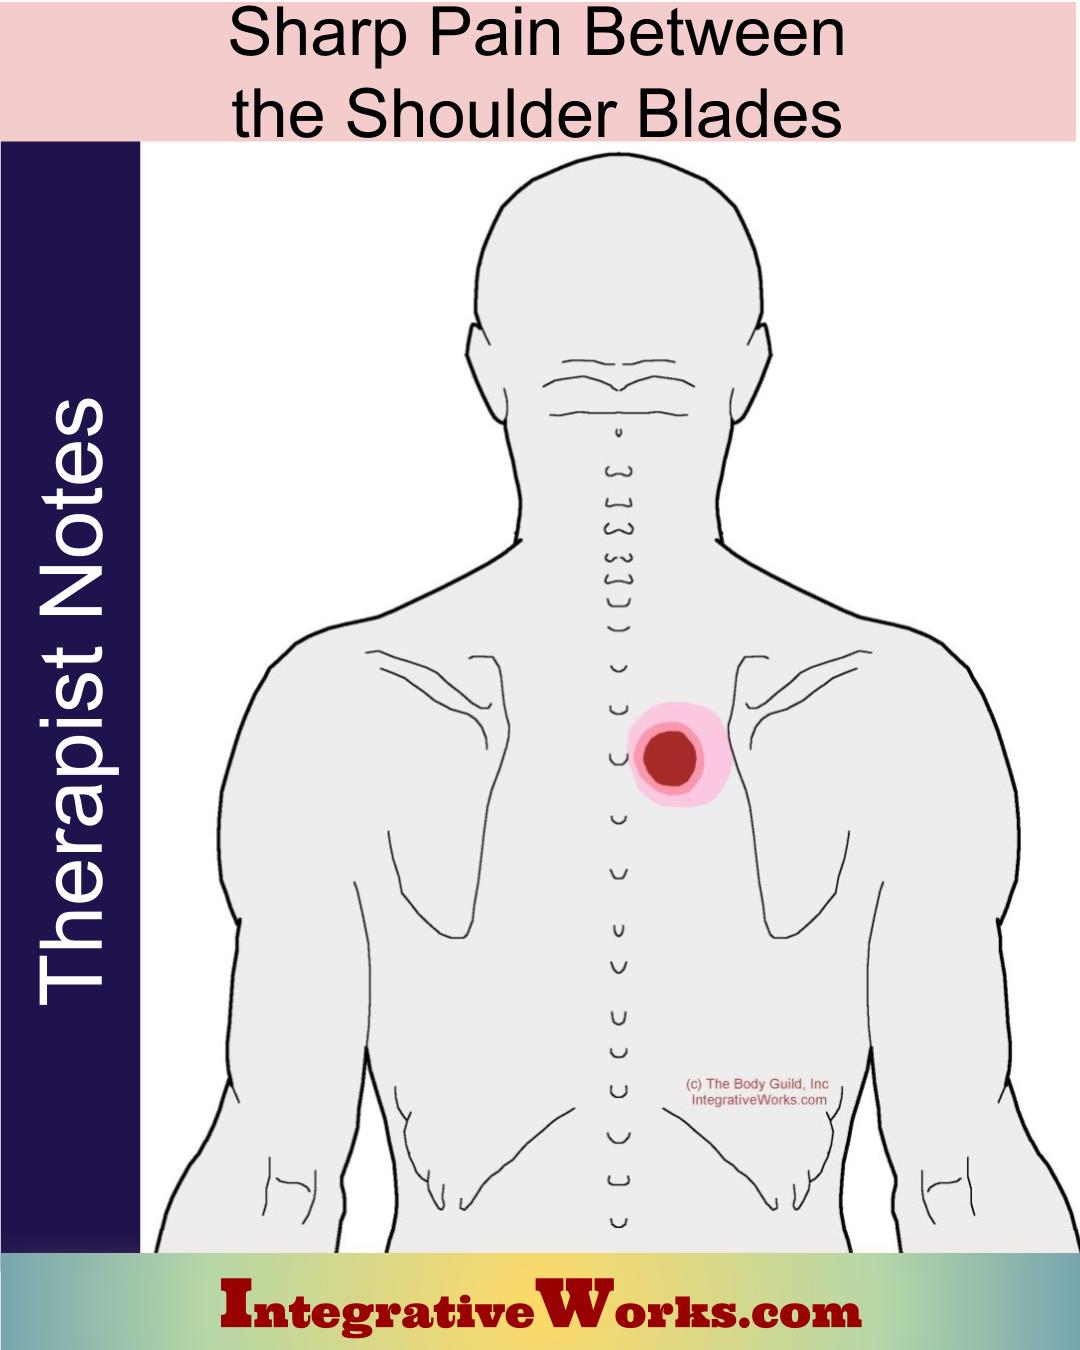 Sharp Pain Between the Shoulder Blades – Massage Therapy Notes